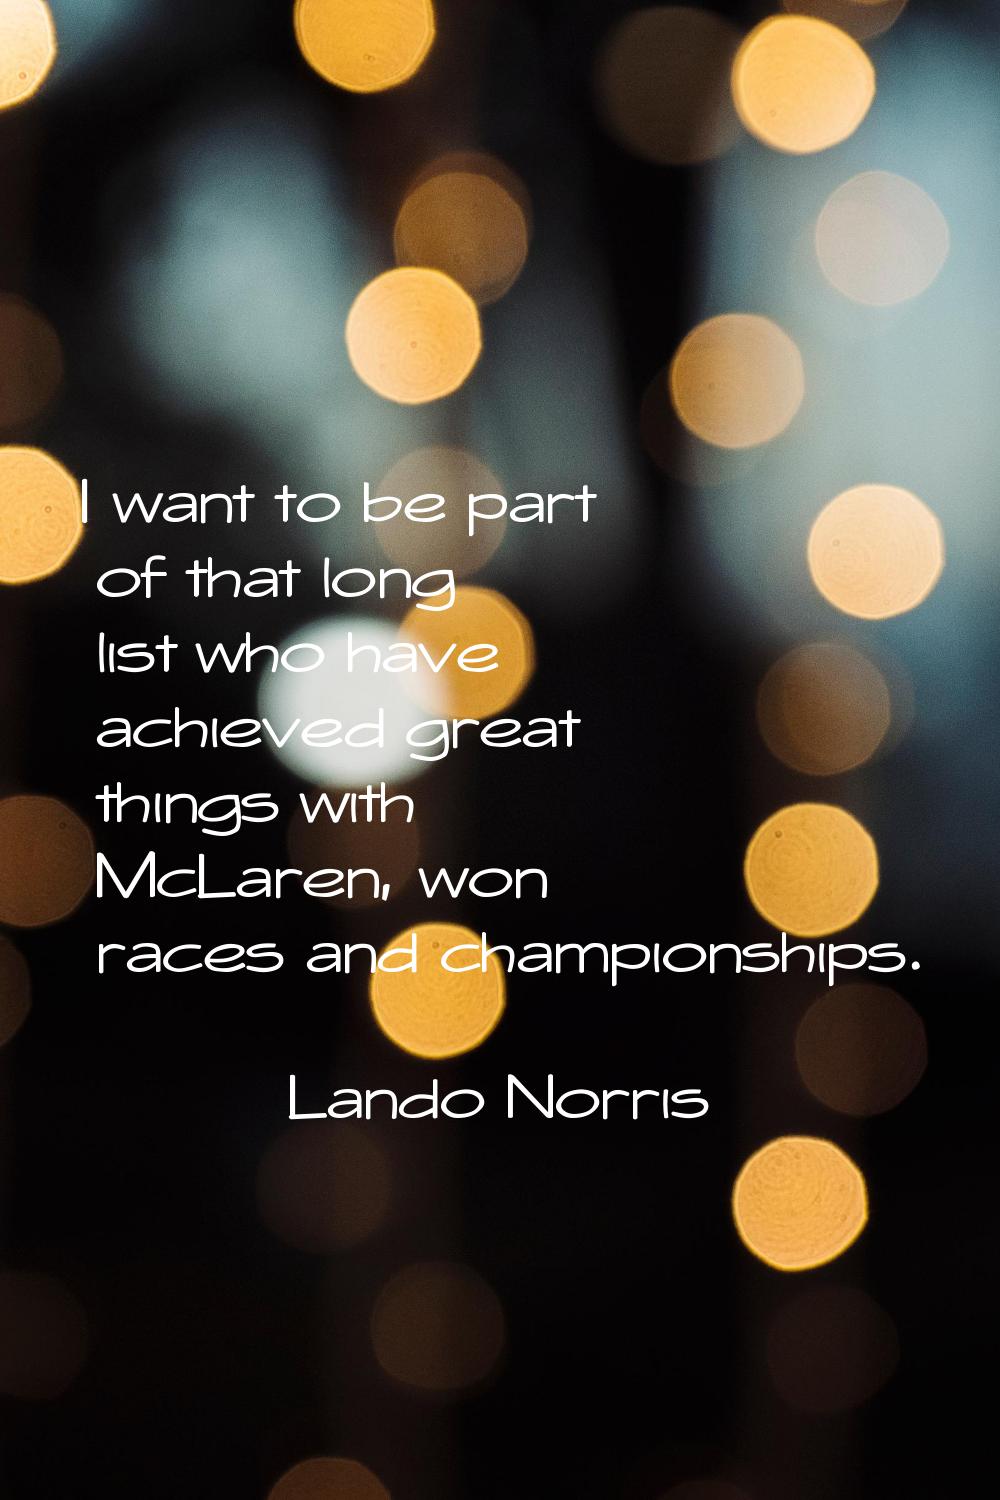 I want to be part of that long list who have achieved great things with McLaren, won races and cham